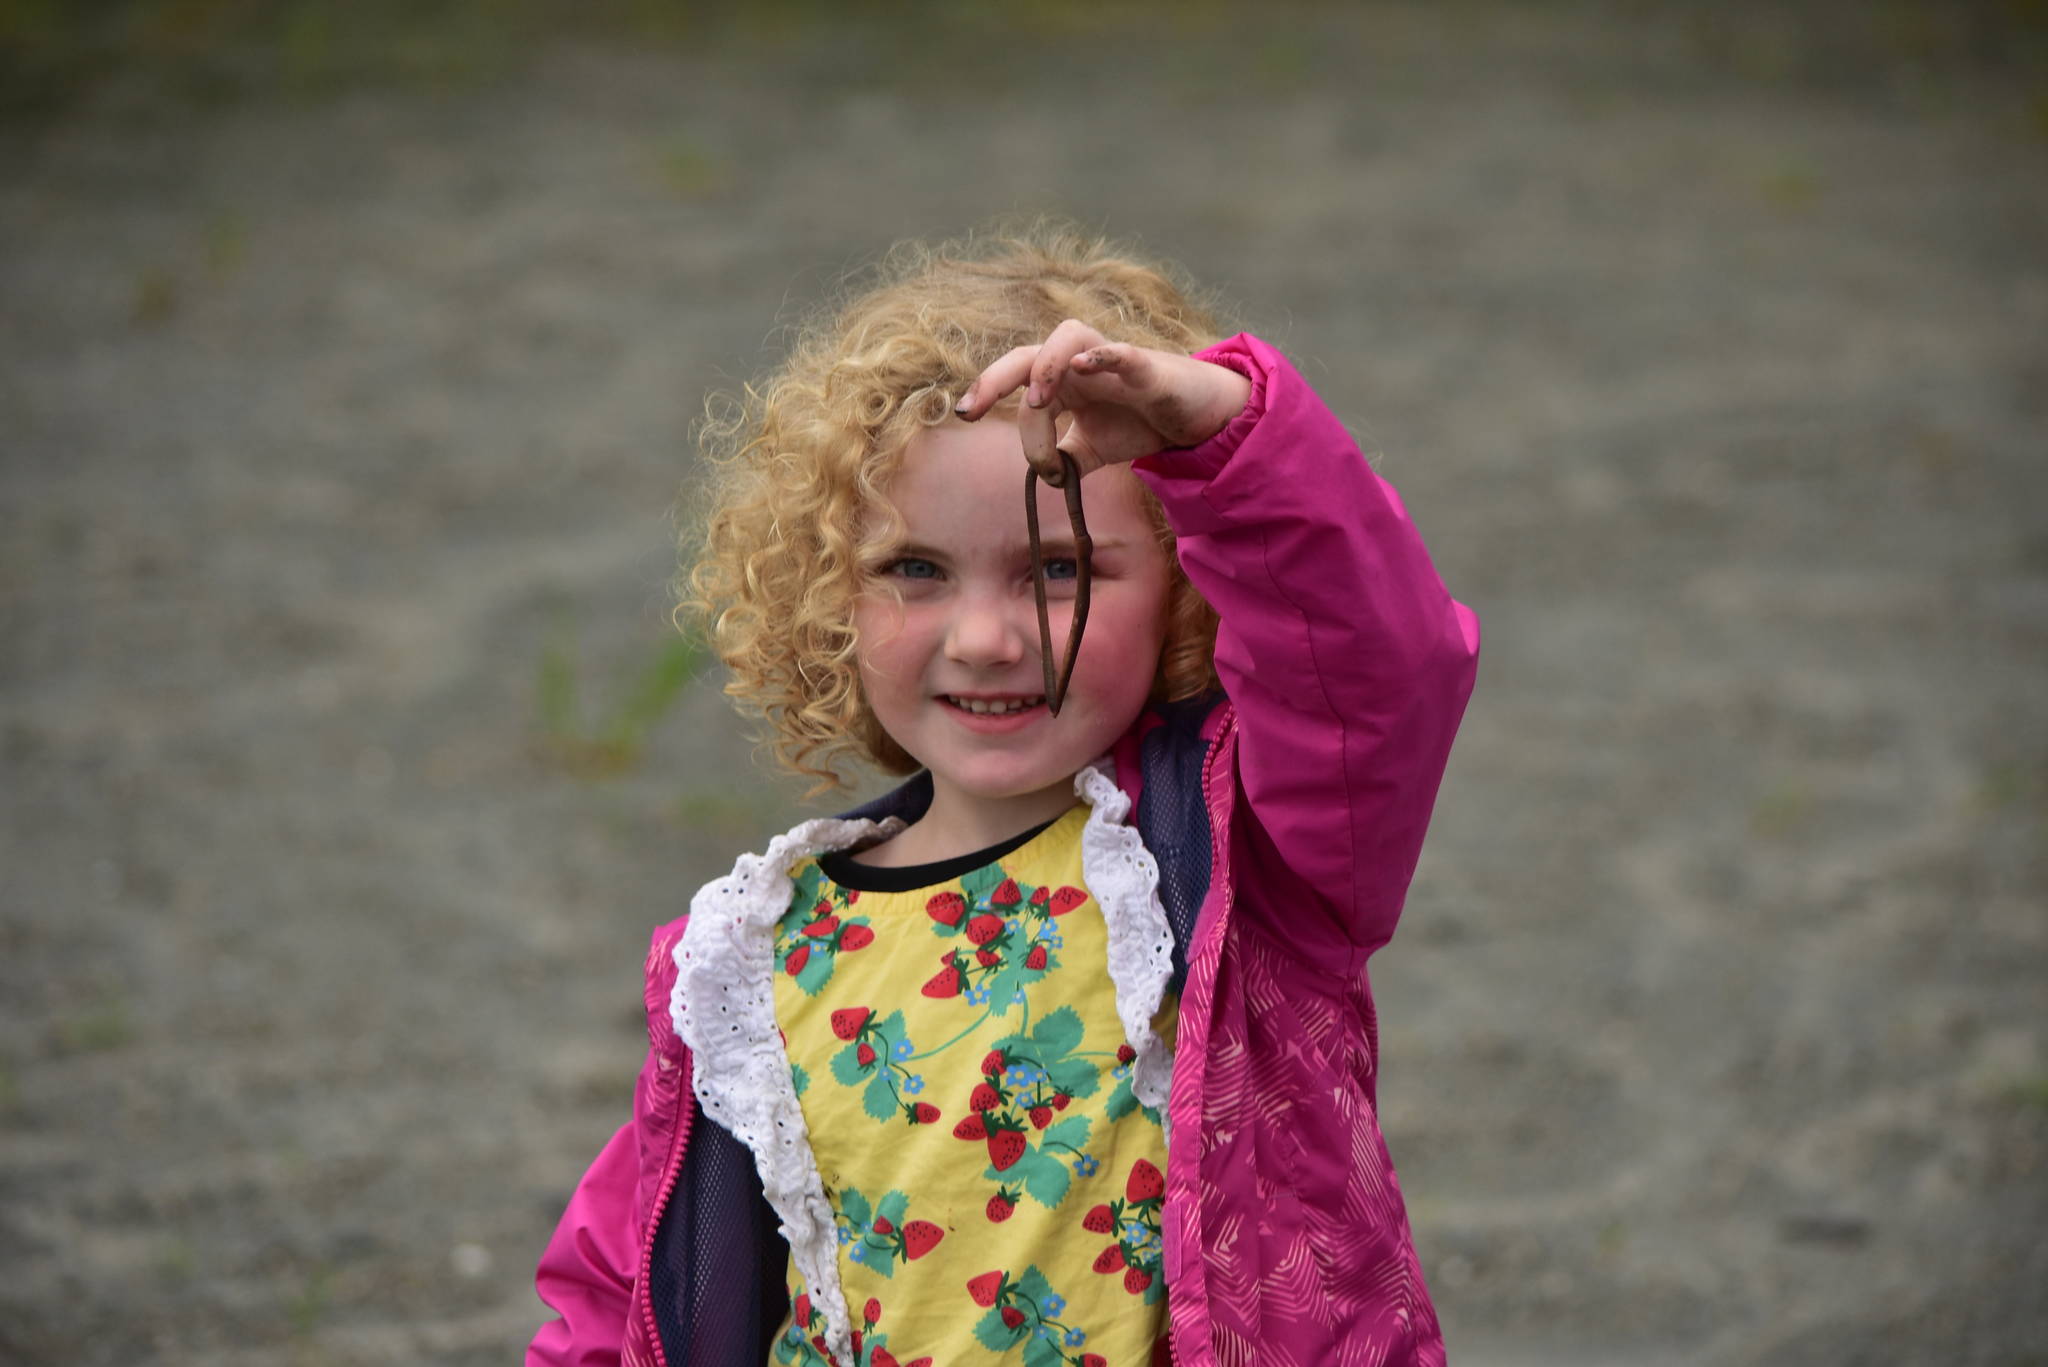 Juneau Montessori School student Abby Auerswald was eager to share a worm she found on Tuesday, Aug. 11, 2020. She doesn’t usually hold big worms, she said, but noted she was holding this particular worm in spite of its large size. (Peter Segall / Juneau Empire)